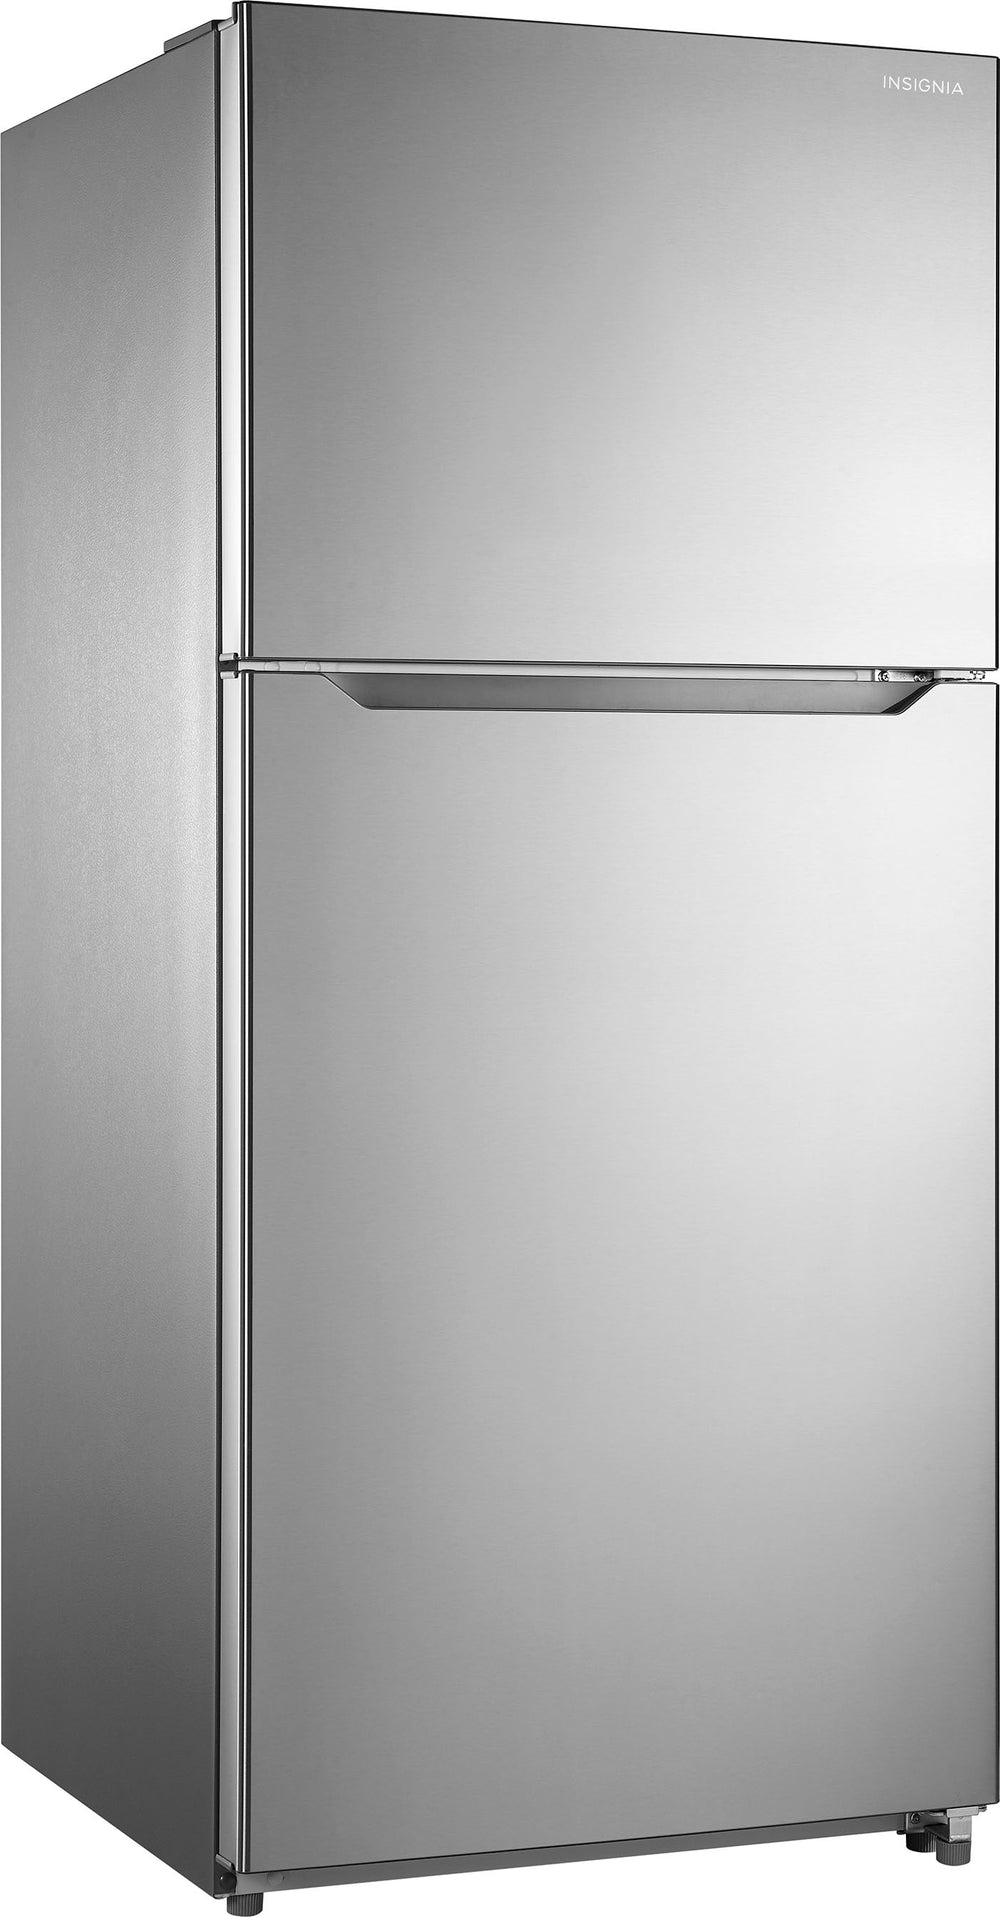 Insignia™ - 18 Cu. Ft. Top-Freezer Refrigerator - Stainless steel_1